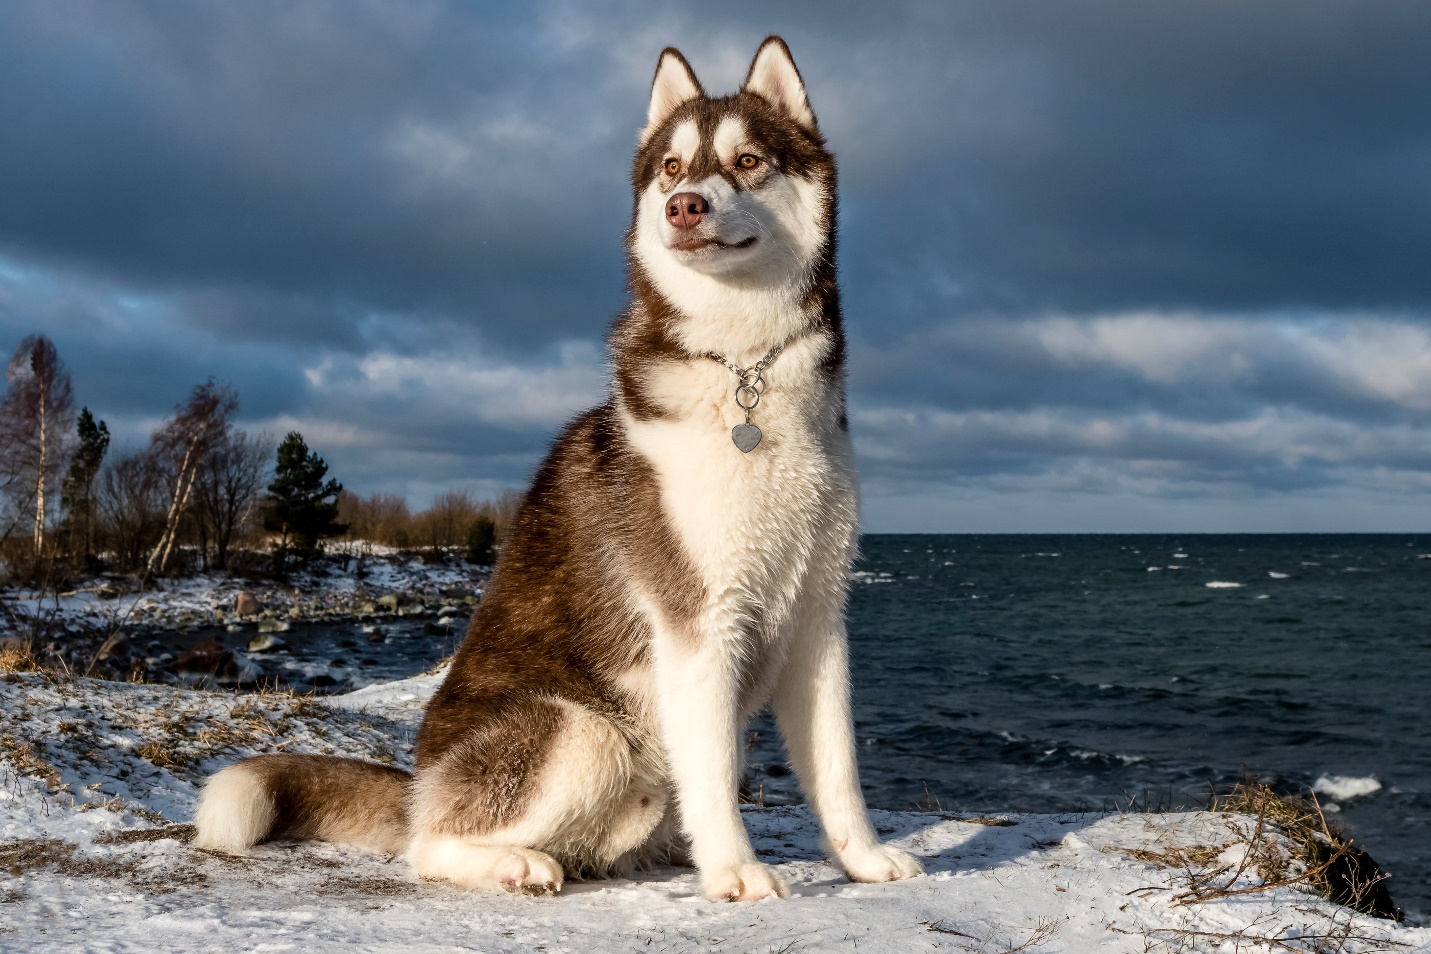 A dog sitting on a beach

Description automatically generated with medium confidence